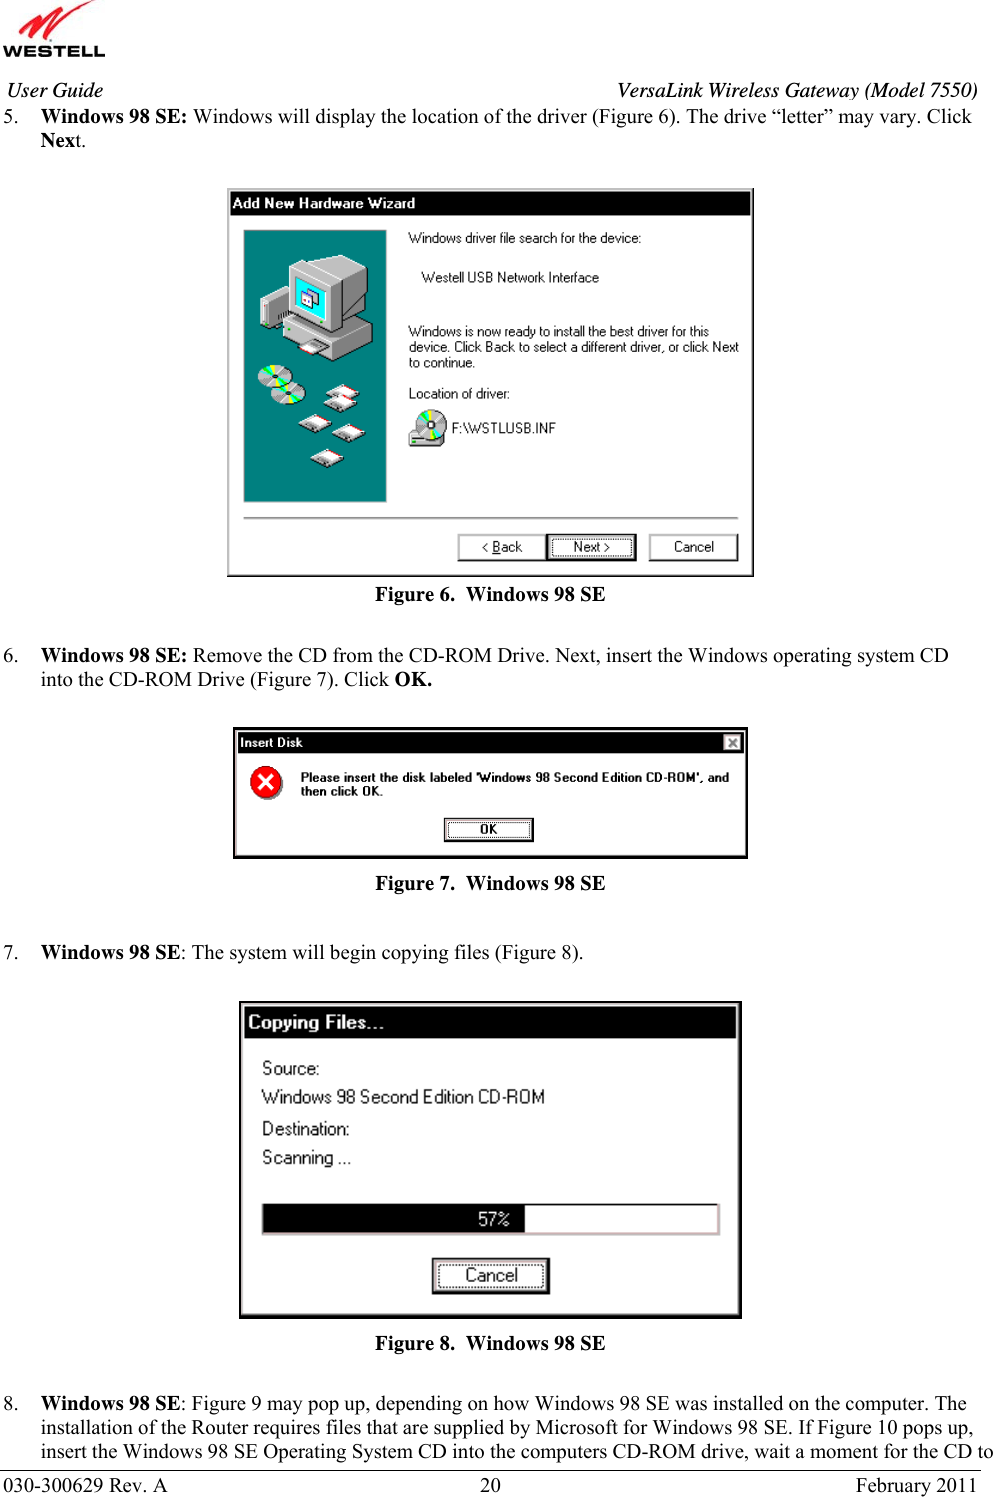       030-300629 Rev. A  20       February 2011 User Guide  VersaLink Wireless Gateway (Model 7550)5. Windows 98 SE: Windows will display the location of the driver (Figure 6). The drive “letter” may vary. Click Next.   Figure 6.  Windows 98 SE  6. Windows 98 SE: Remove the CD from the CD-ROM Drive. Next, insert the Windows operating system CD into the CD-ROM Drive (Figure 7). Click OK.   Figure 7.  Windows 98 SE  7. Windows 98 SE: The system will begin copying files (Figure 8).   Figure 8.  Windows 98 SE  8. Windows 98 SE: Figure 9 may pop up, depending on how Windows 98 SE was installed on the computer. The installation of the Router requires files that are supplied by Microsoft for Windows 98 SE. If Figure 10 pops up, insert the Windows 98 SE Operating System CD into the computers CD-ROM drive, wait a moment for the CD to 